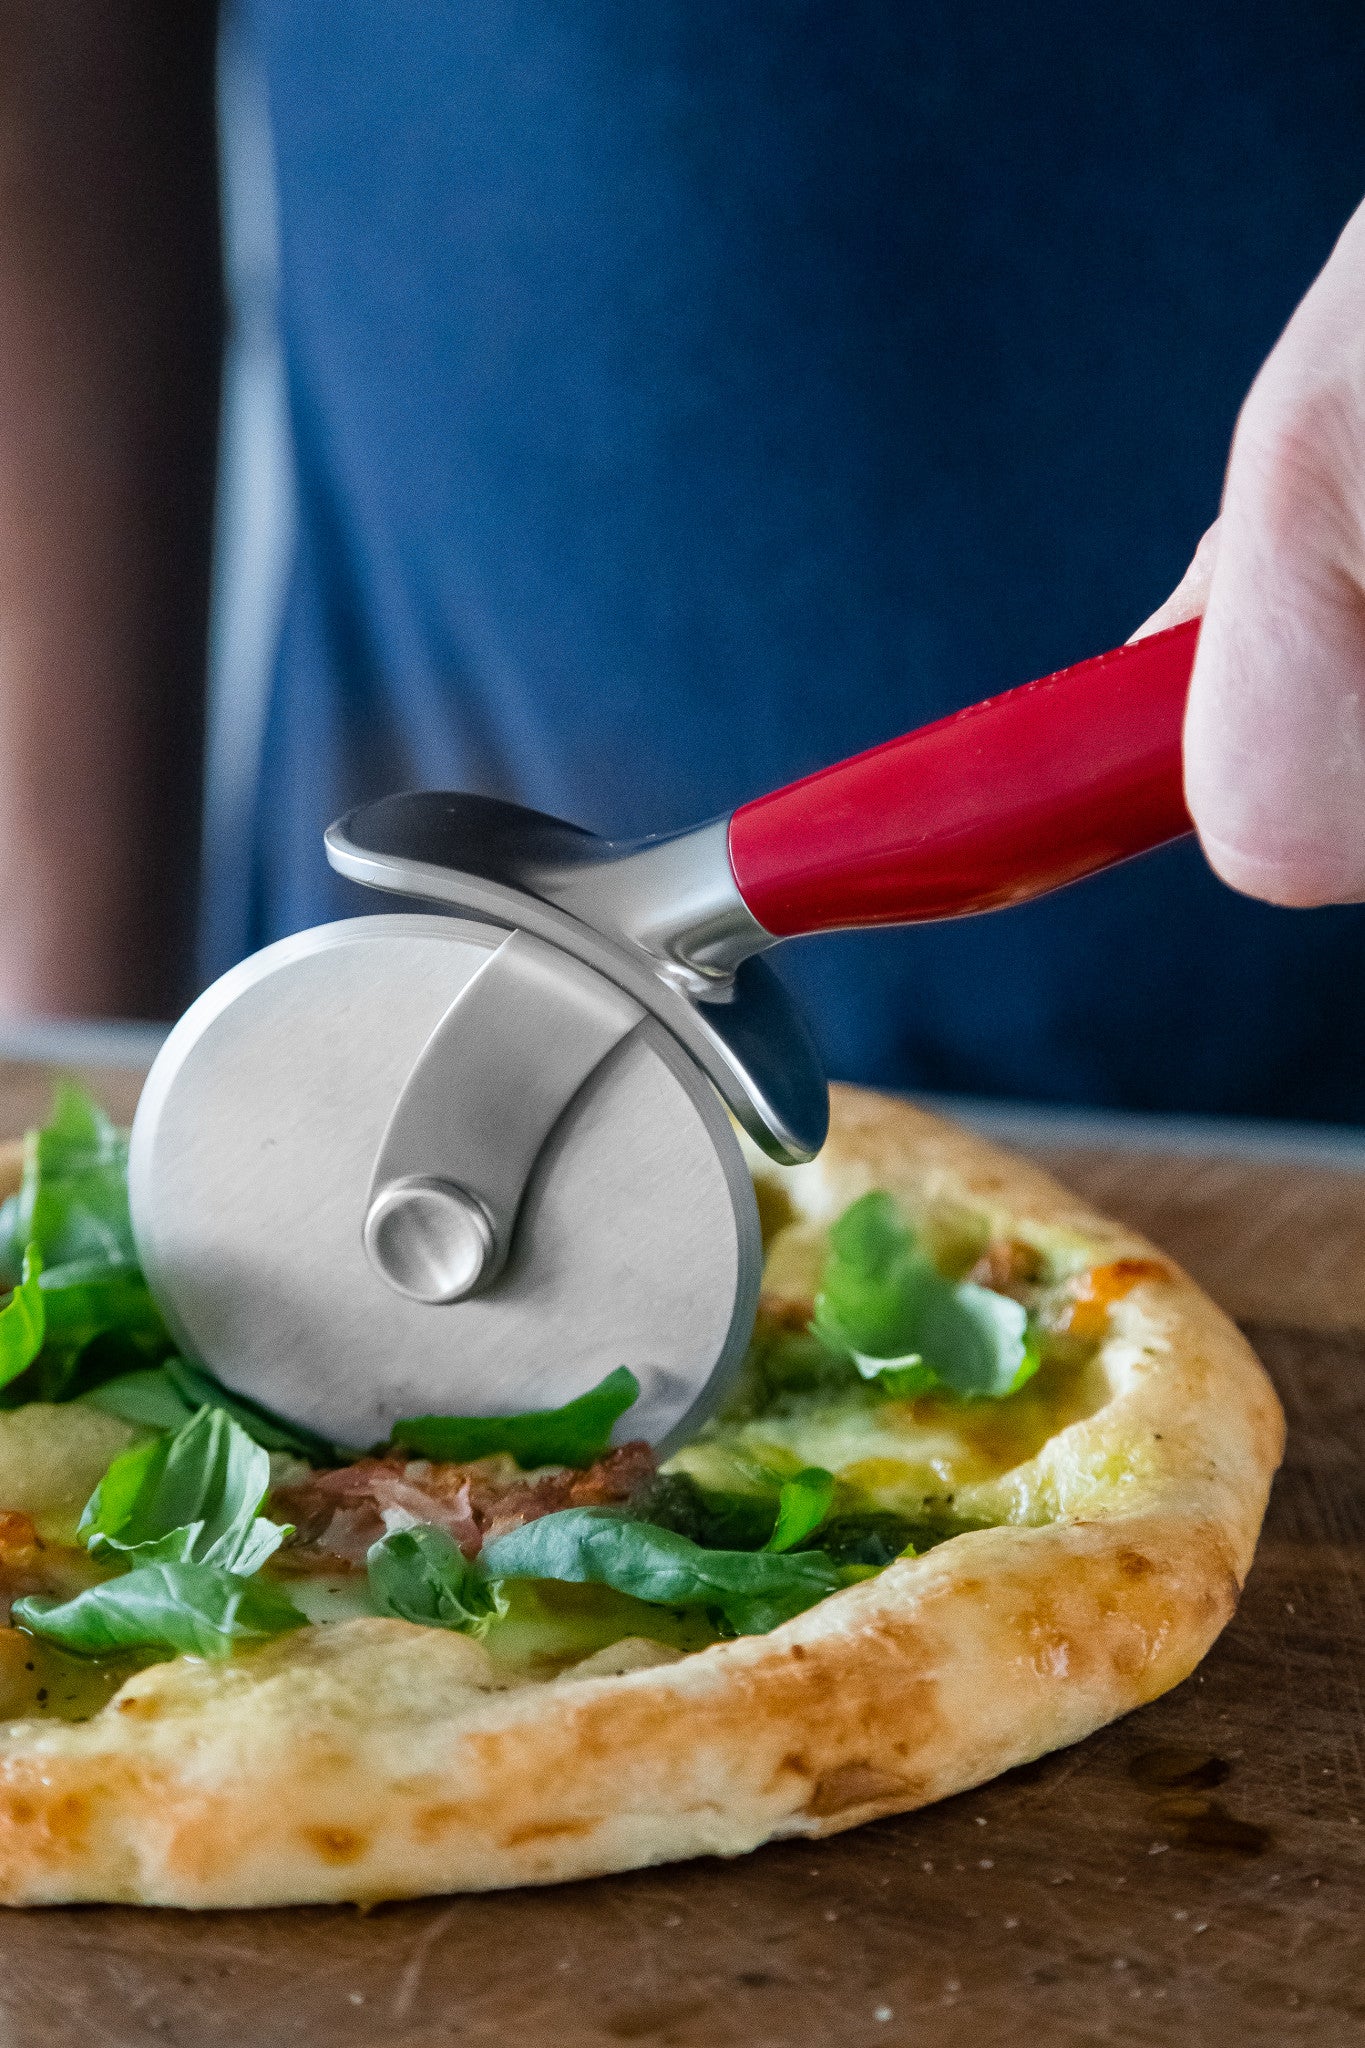 KitchenAid Stainless Steel Pizza Cutter - Empire Red – CookServeEnjoy